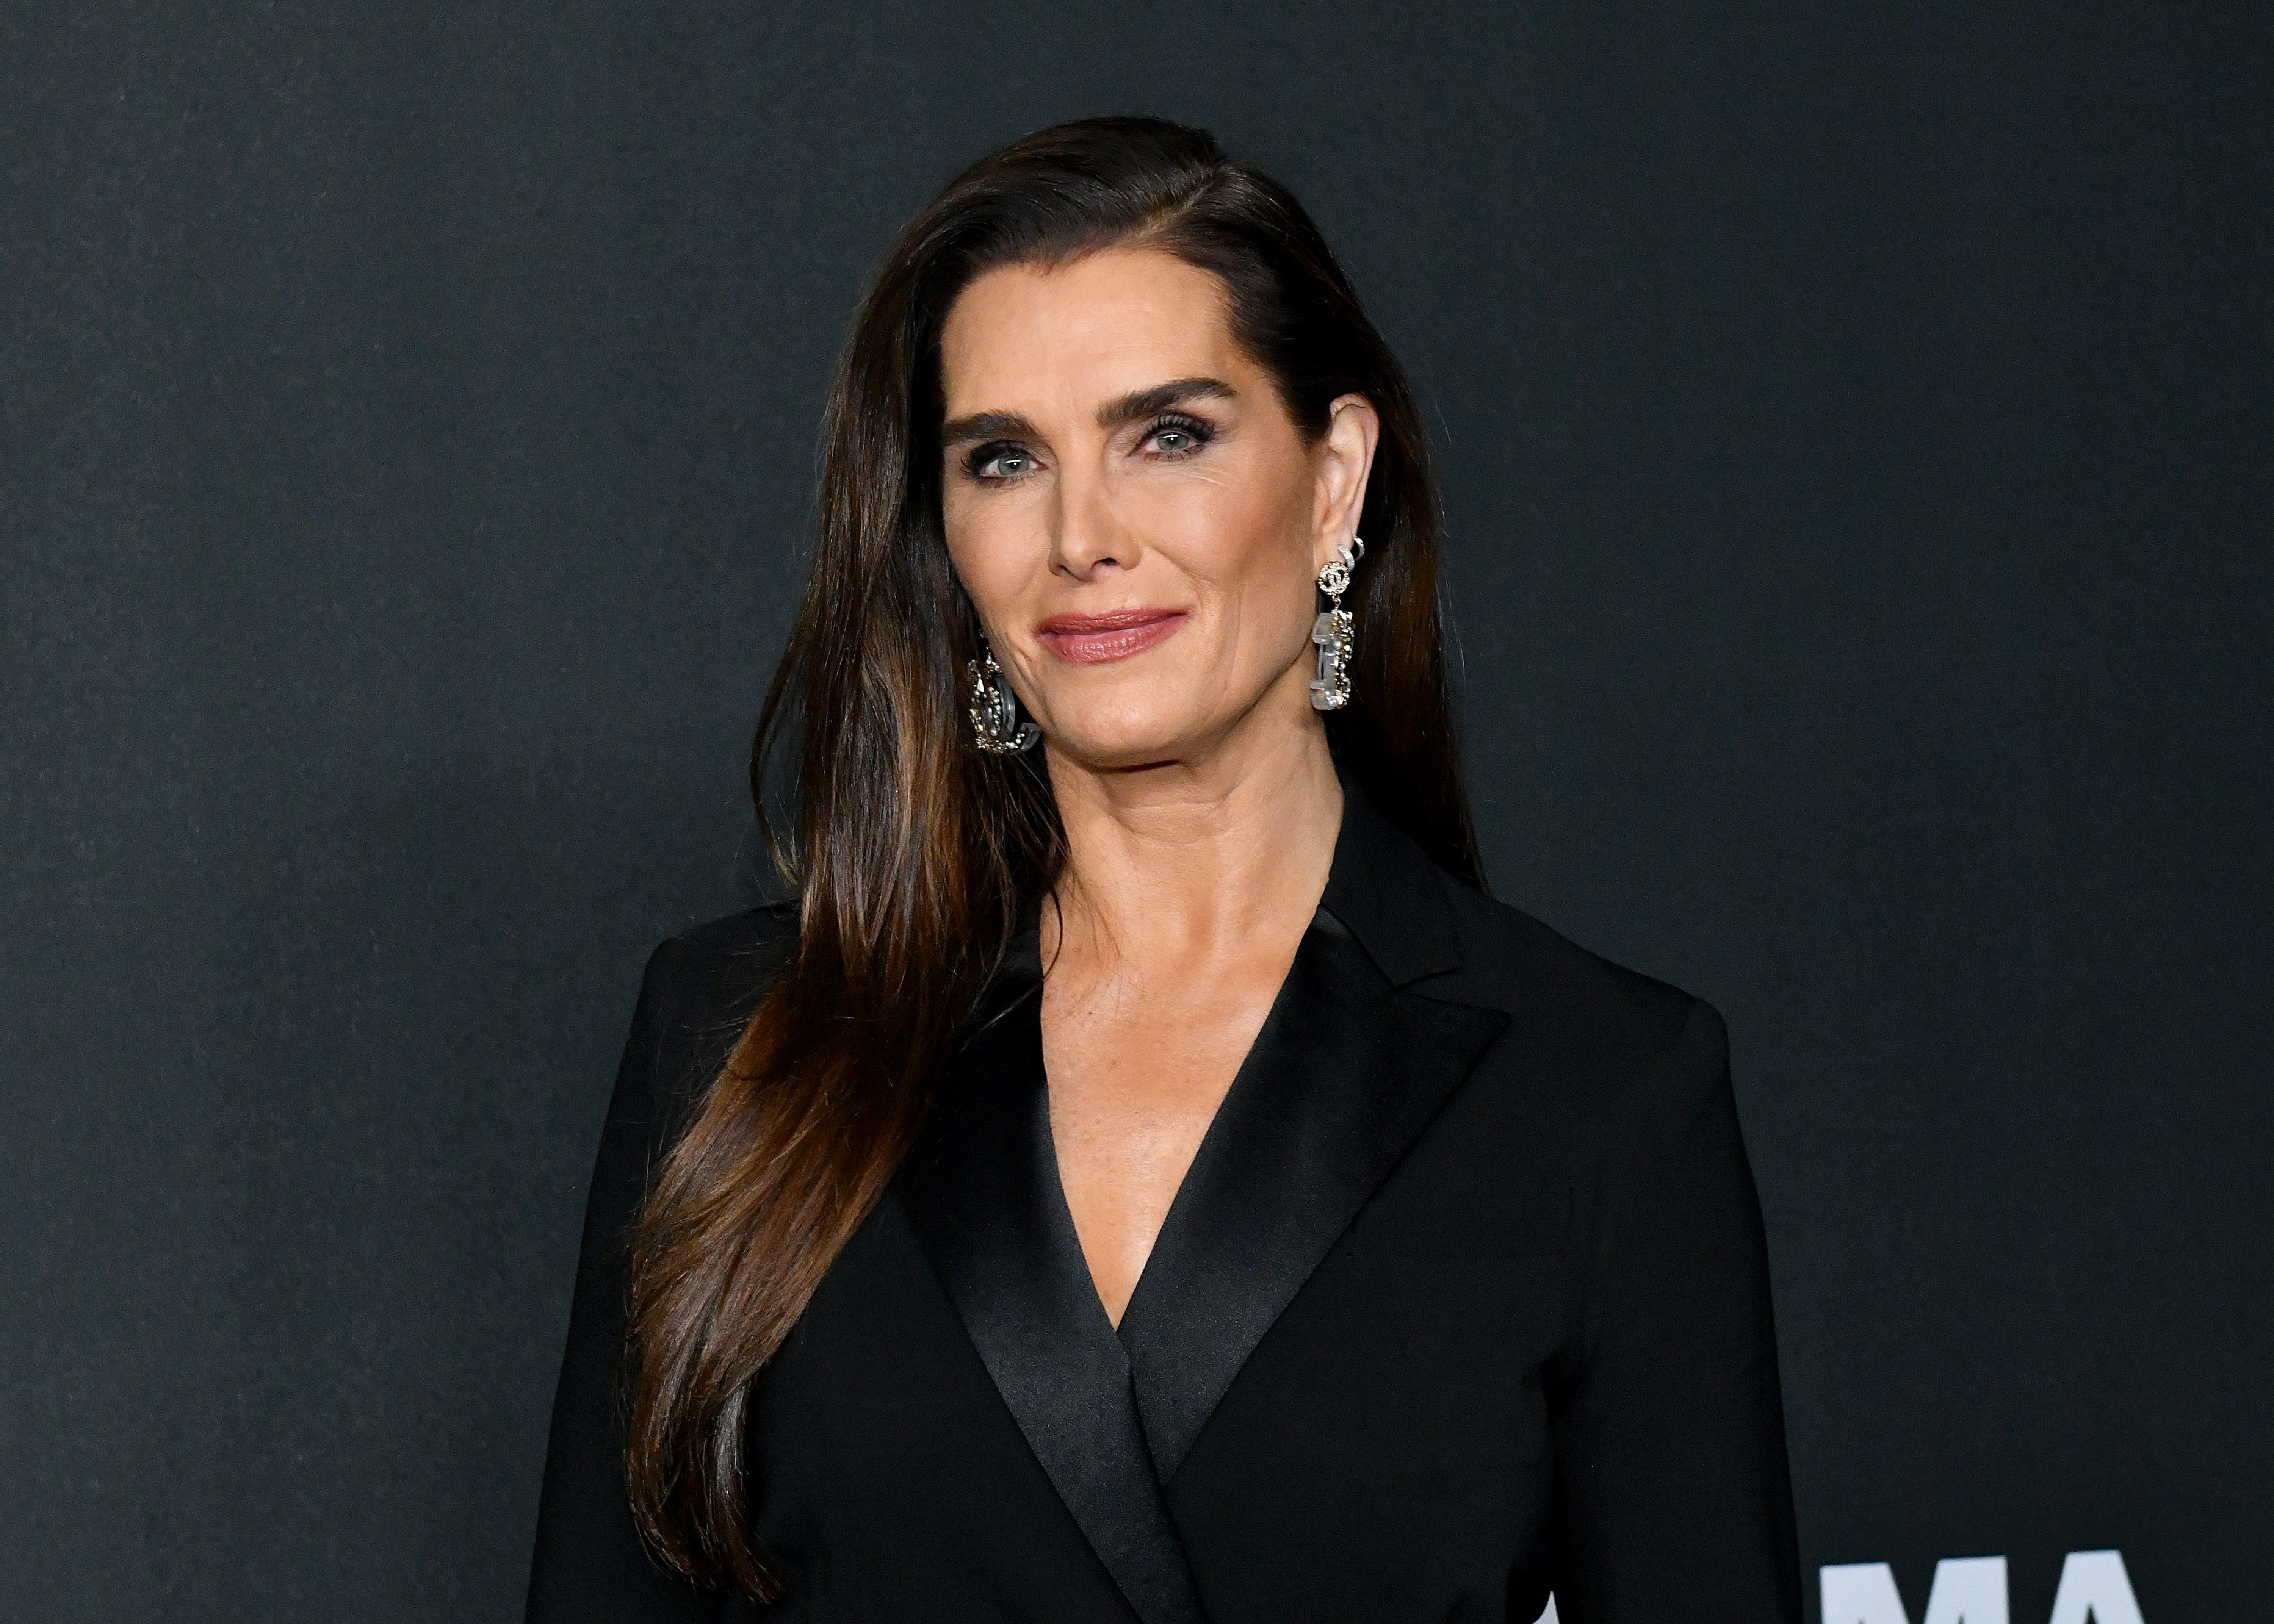  Brooke Shields at the MoMA's Twelfth Annual Film Benefit Presented By CHANEL Honoring Laura Dern on November 12, 2019 in New York City. | Source: Getty Images